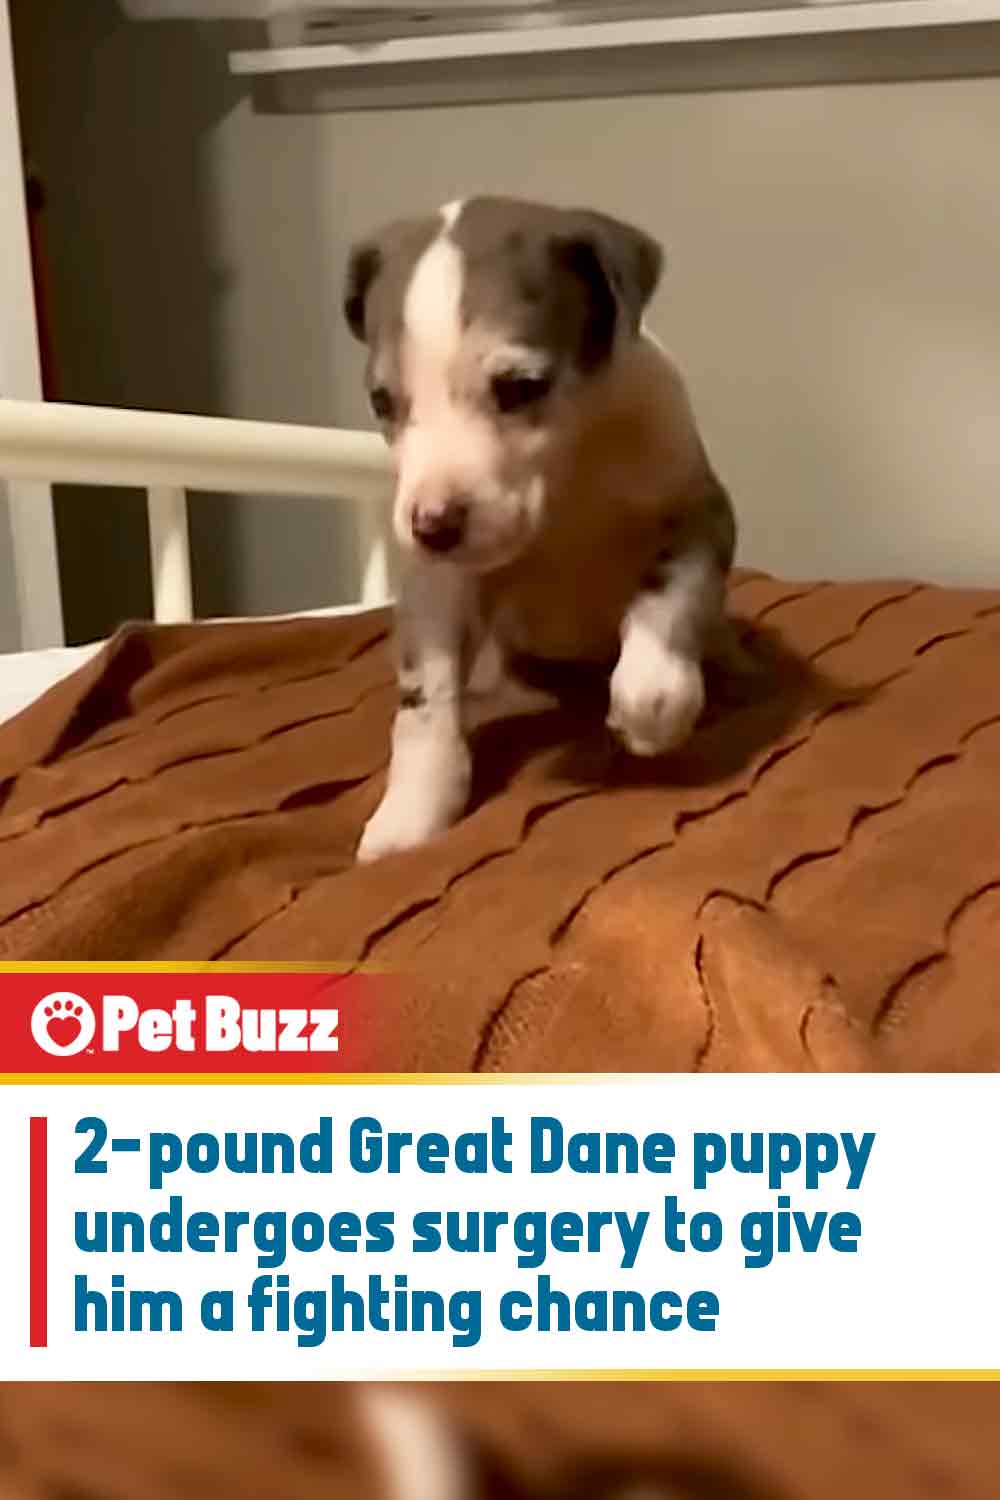 2-pound Great Dane puppy undergoes surgery to give him a fighting chance